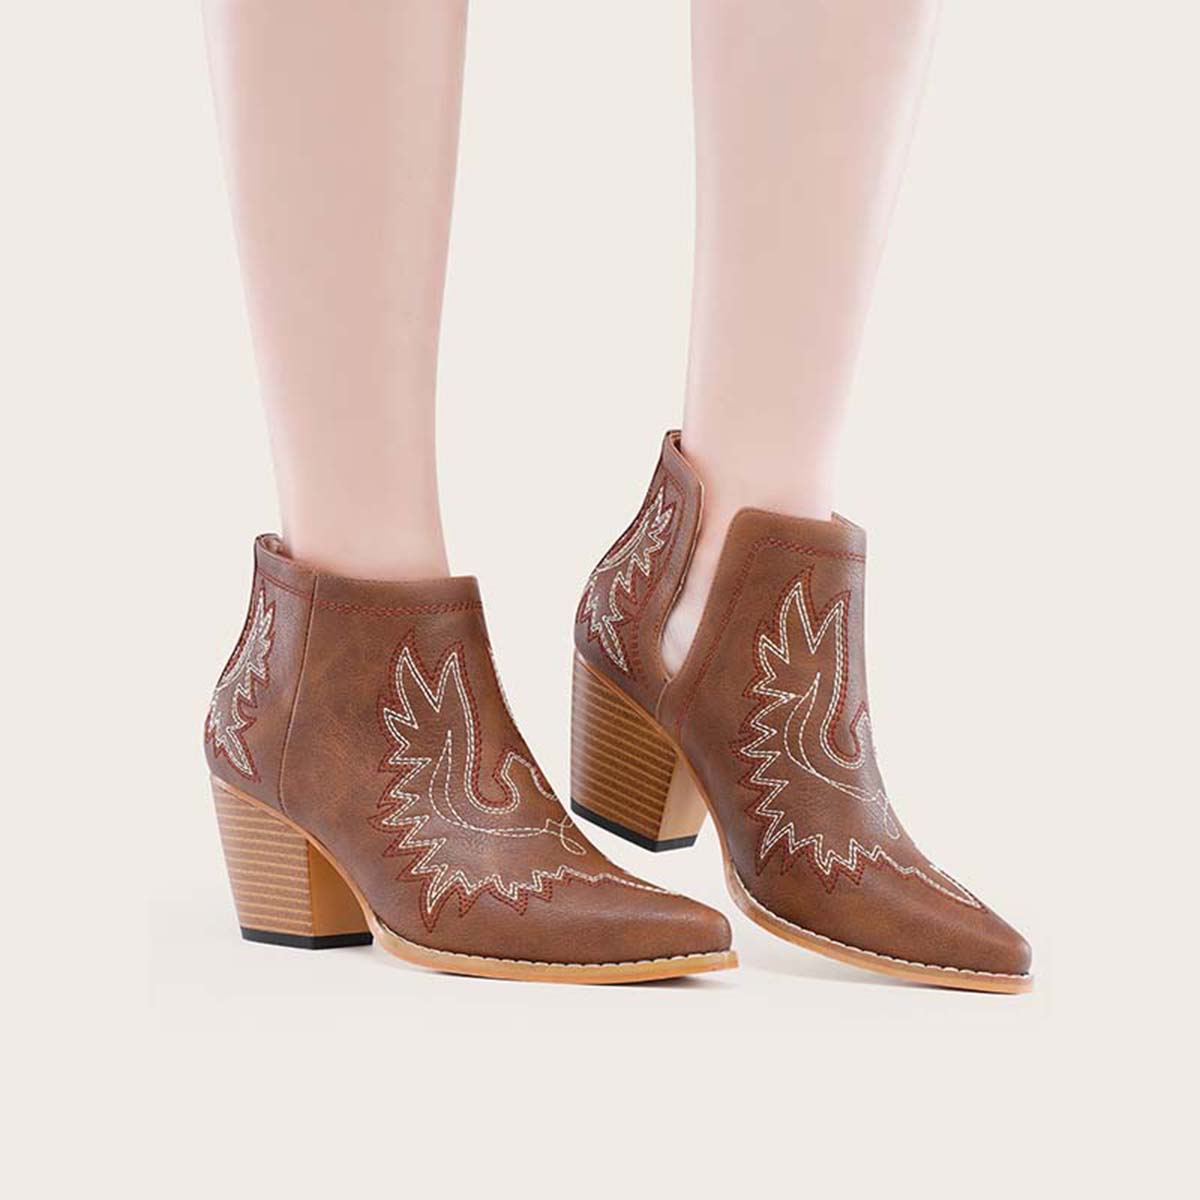 Veooy Coutout Western Cowgirl Boots Slip On Chunky Heel Ankle Booties